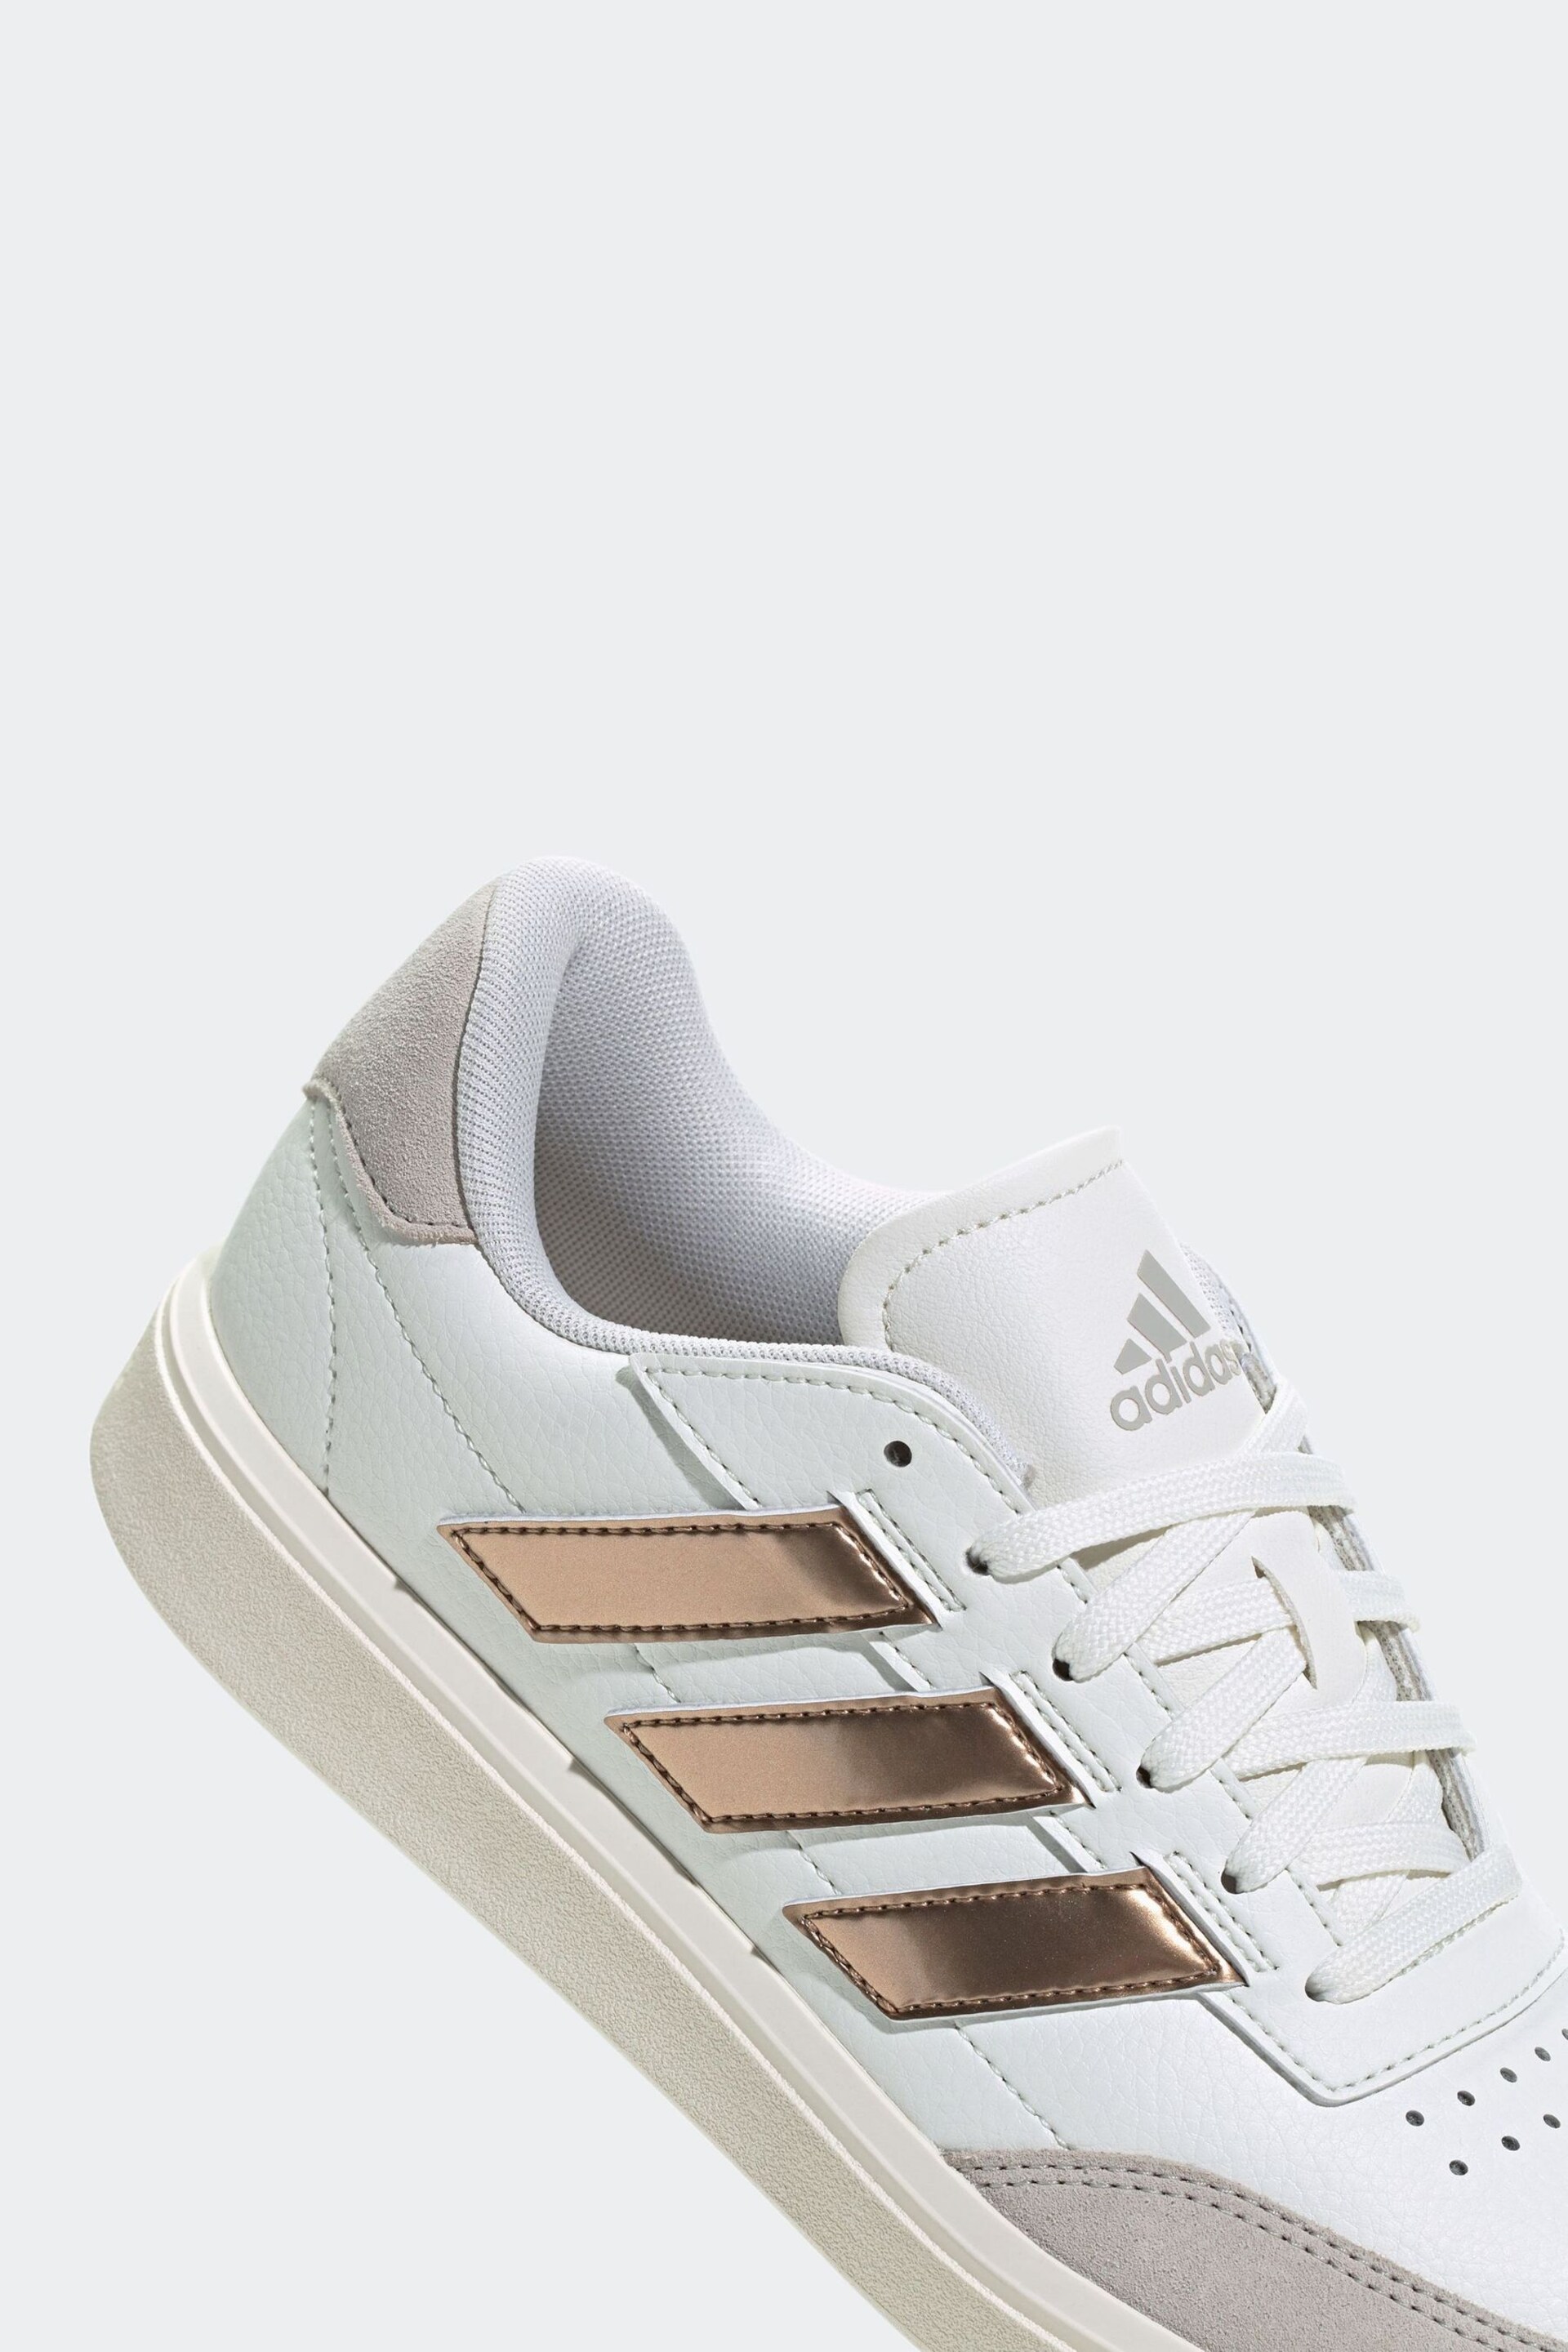 adidas Beige Court Block Trainers - Image 6 of 8